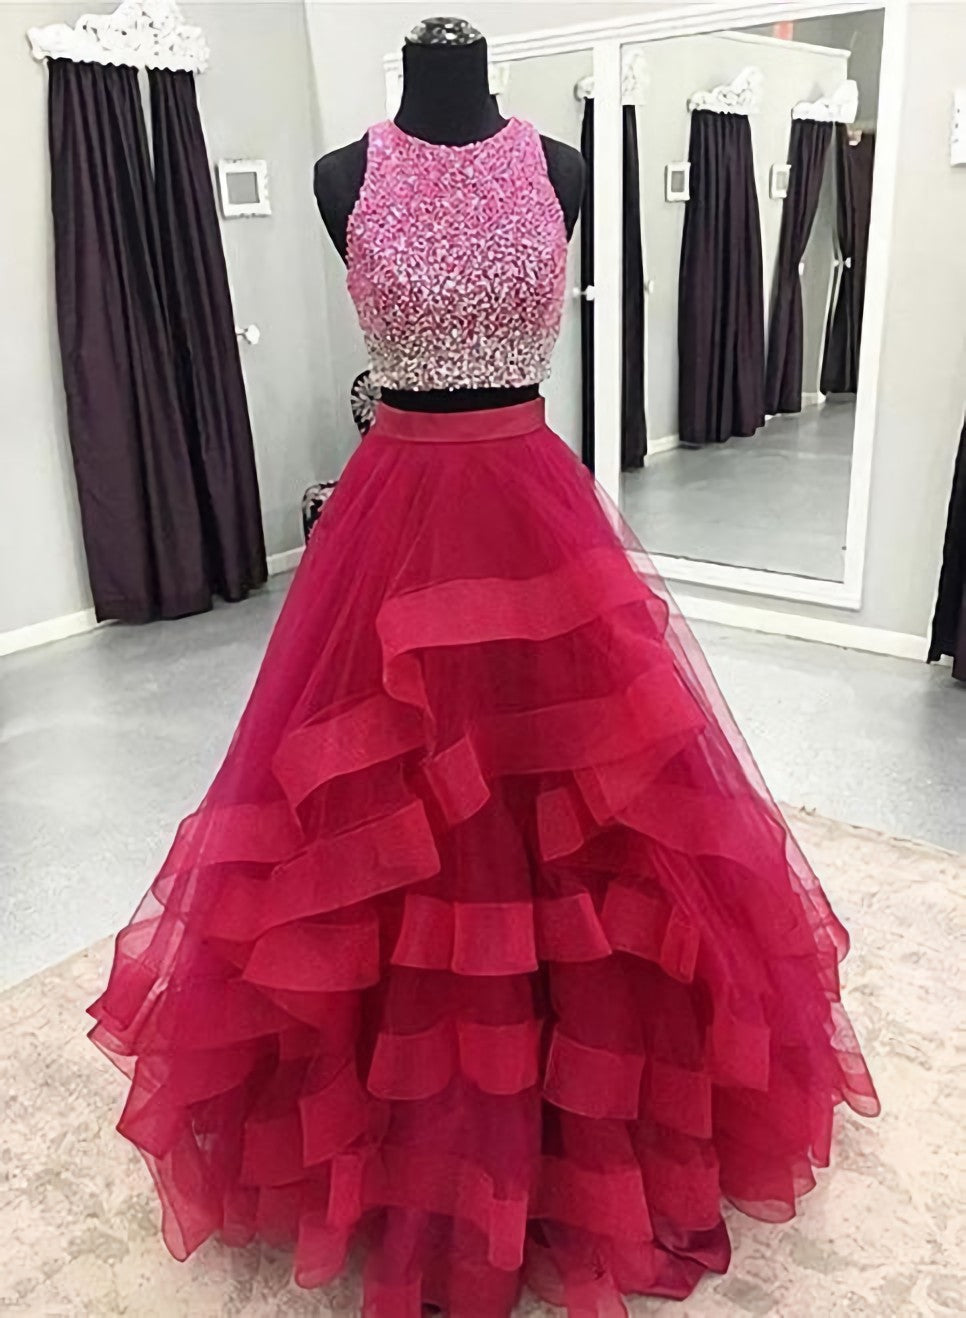 Prom Dress Silk, Two Pieces Prom Dress, Long Dress, Back To Schoold Party Gown